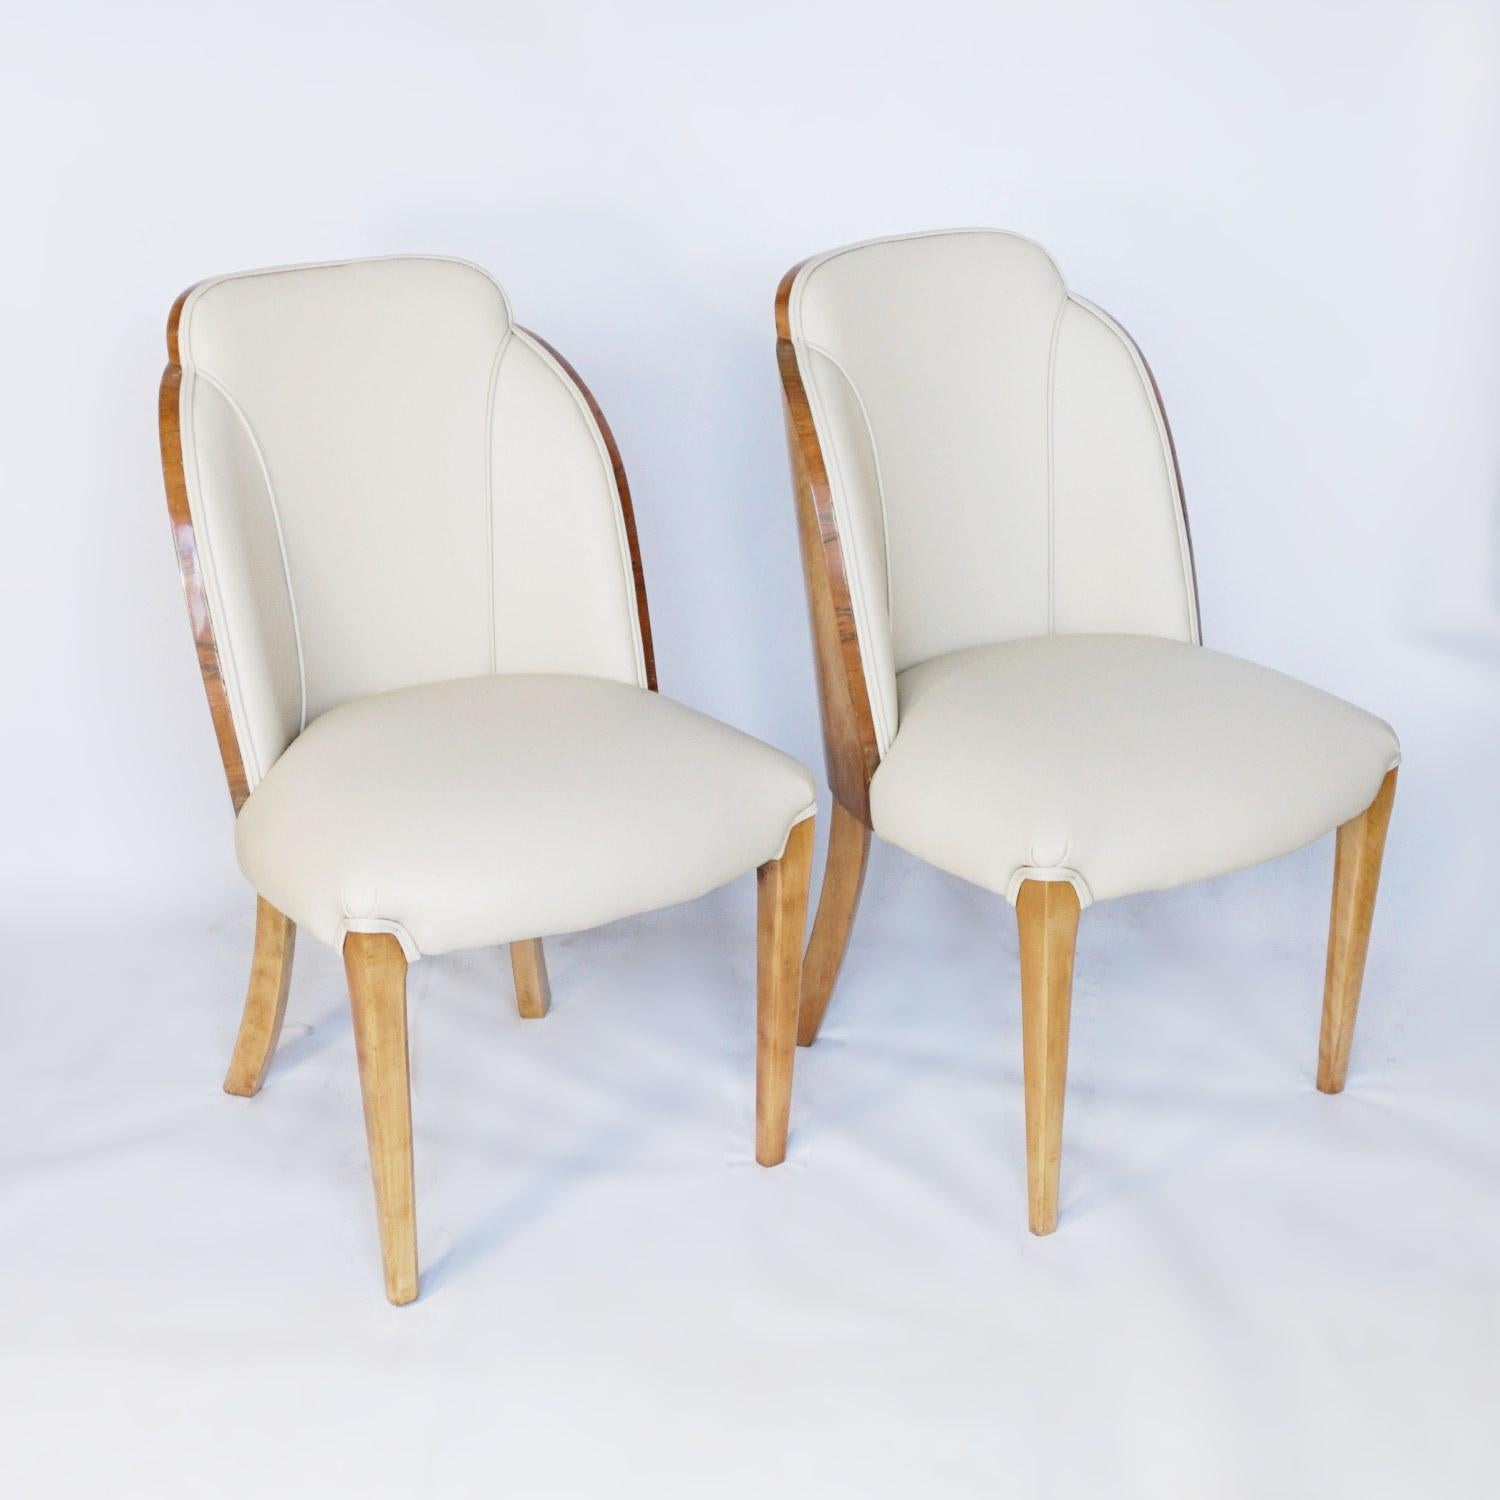 A pair of walnut backed cloud chairs by Harry and Lou Epstein. Burr walnut veneers, upholstered in cream leather. 

Dimensions: Chair H 86cm W 49cm D 47cm, seat H 44cm D 46cm

Origin: English

Date: circa 1930

Item No: 902214

All of our